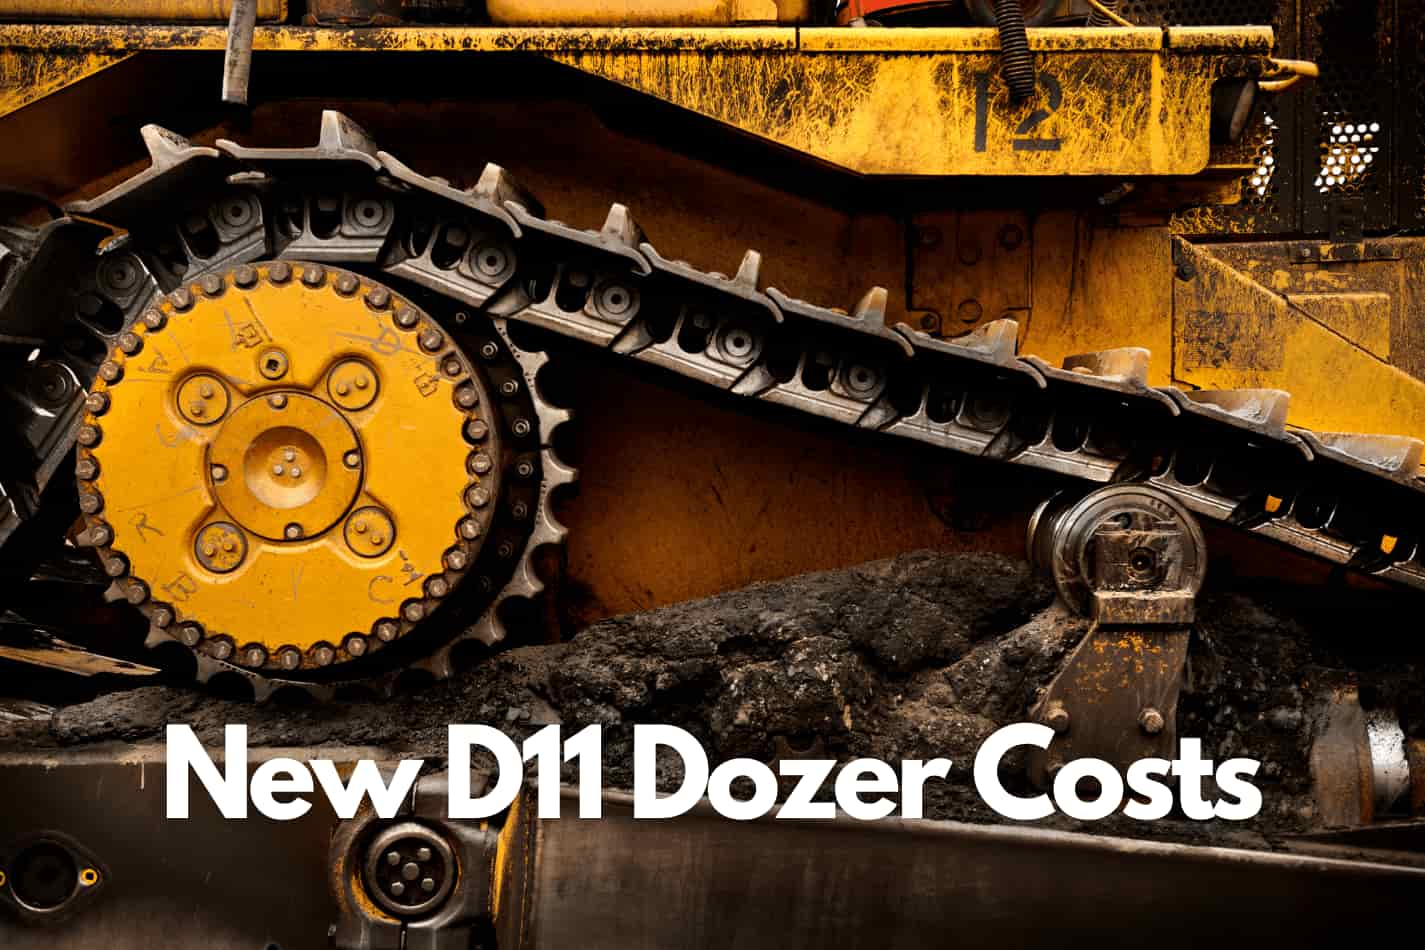 How Much Does a New D11 Dozer Cost?